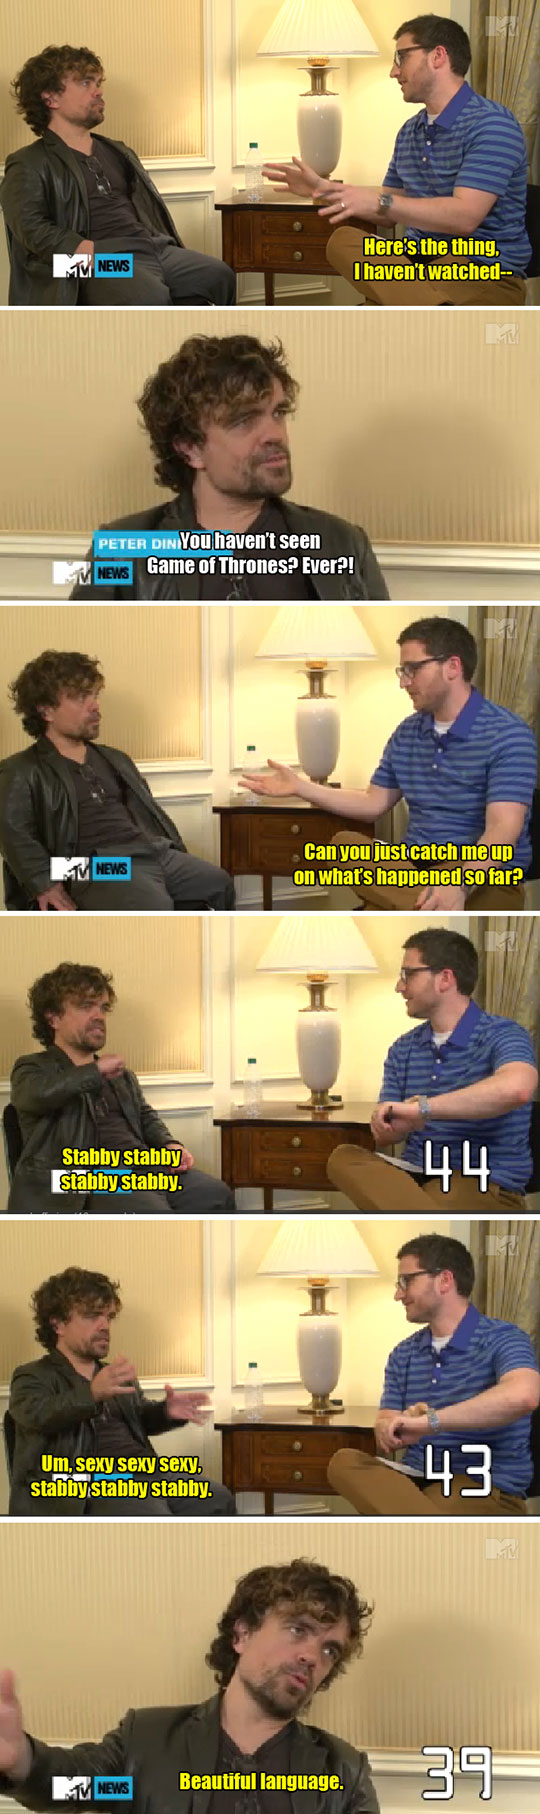 peter dinklage game of thrones joke - Mv News Here's the thing, I haven't watched Peter Din You haven't seen Game of Thrones? Ever?! News News Can you just catch me up on what's happened so far? Stabby stabby stabby stabby. 44 Um, sexy sexy sexy stabby st